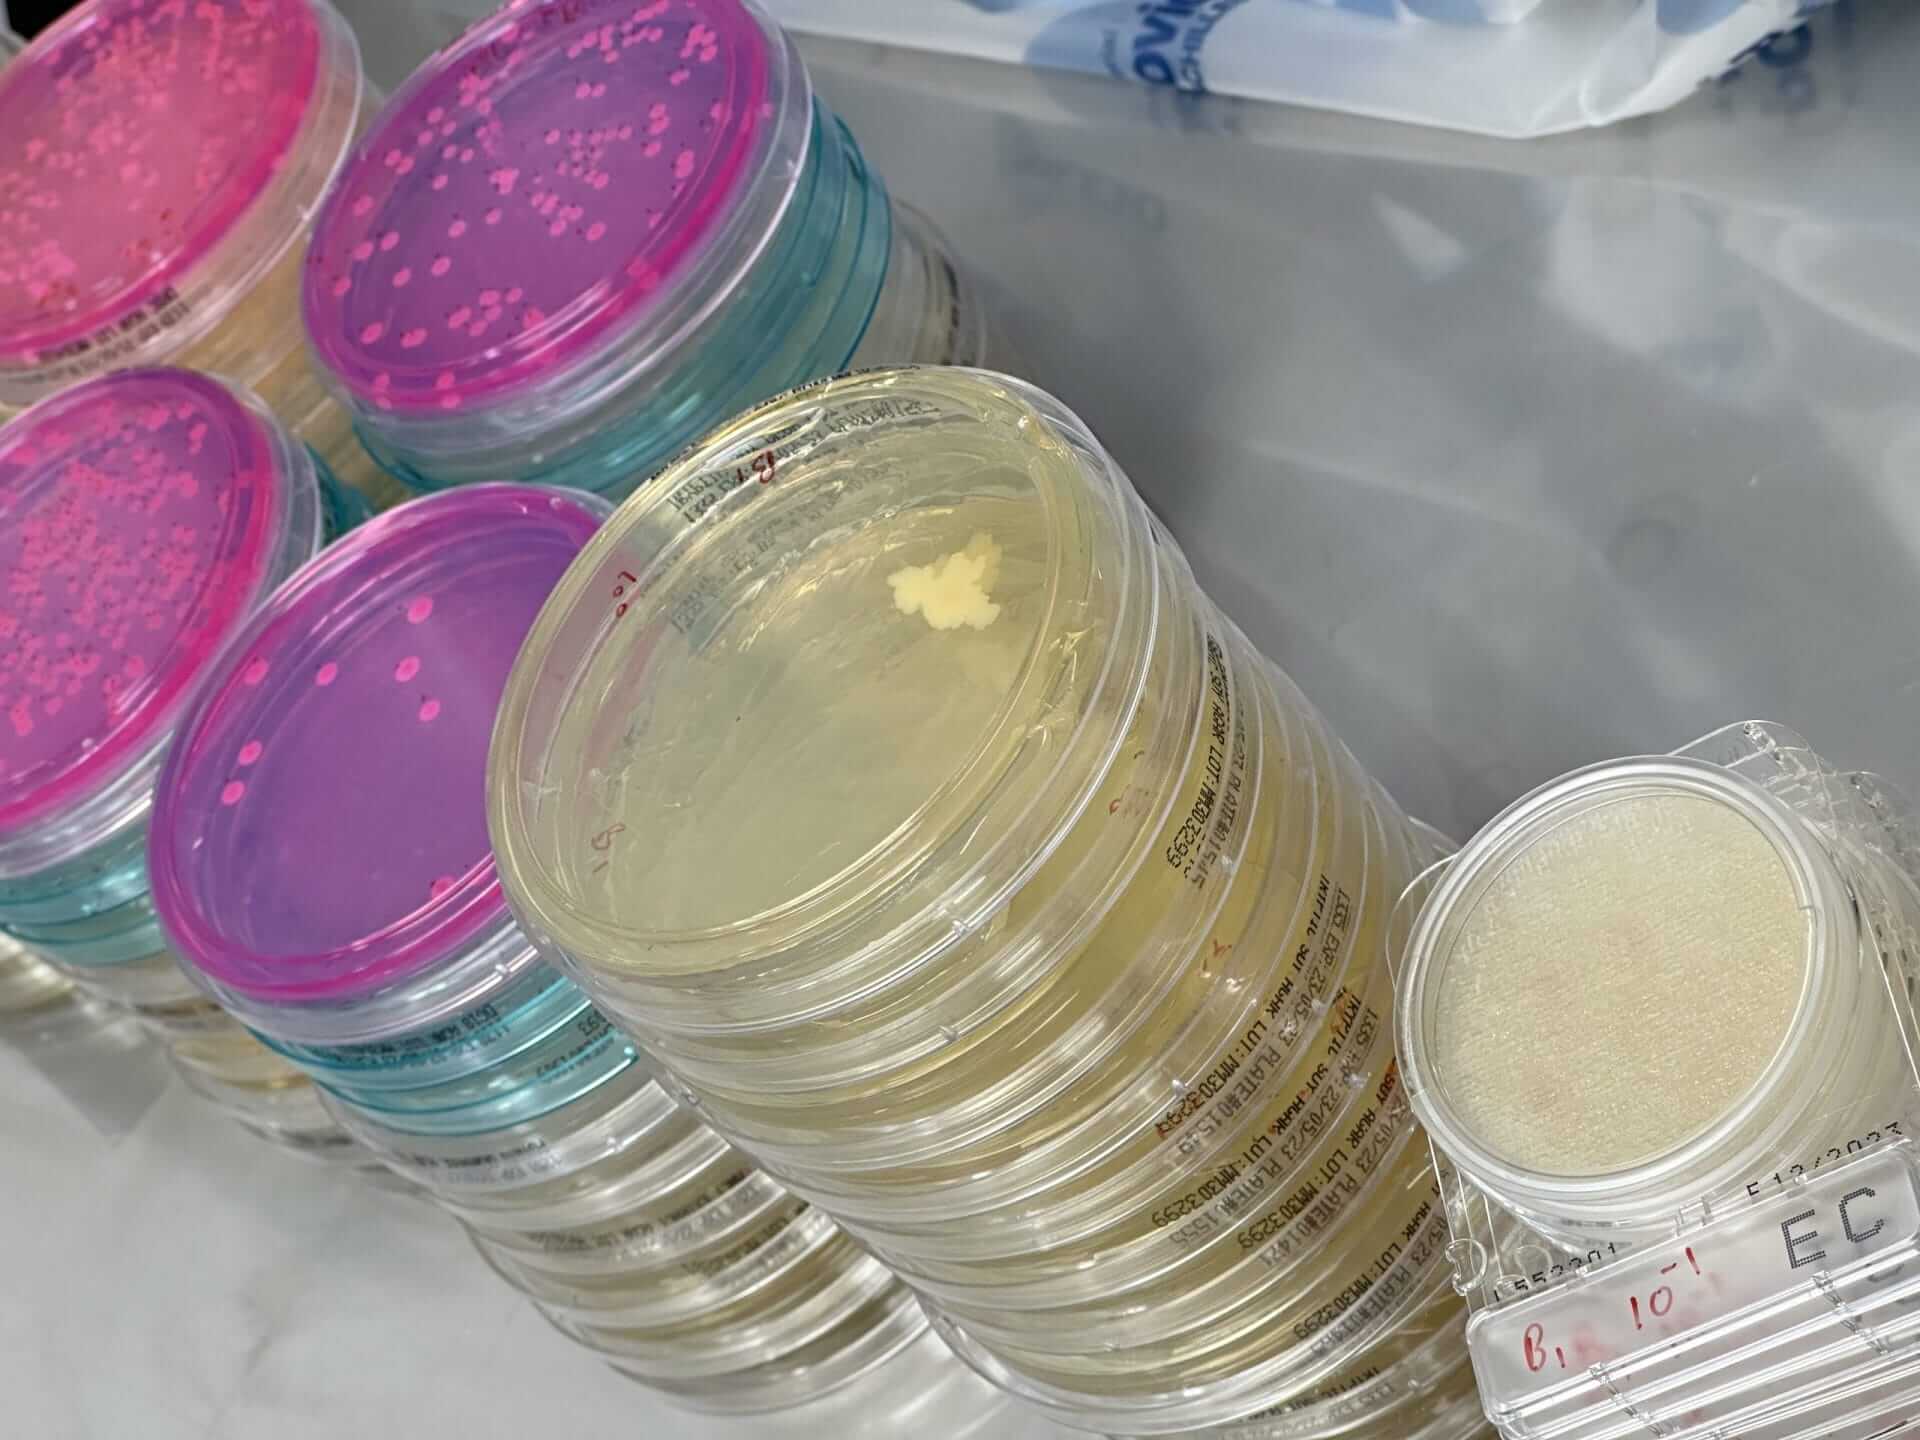 Mould, yeast bacteria testing